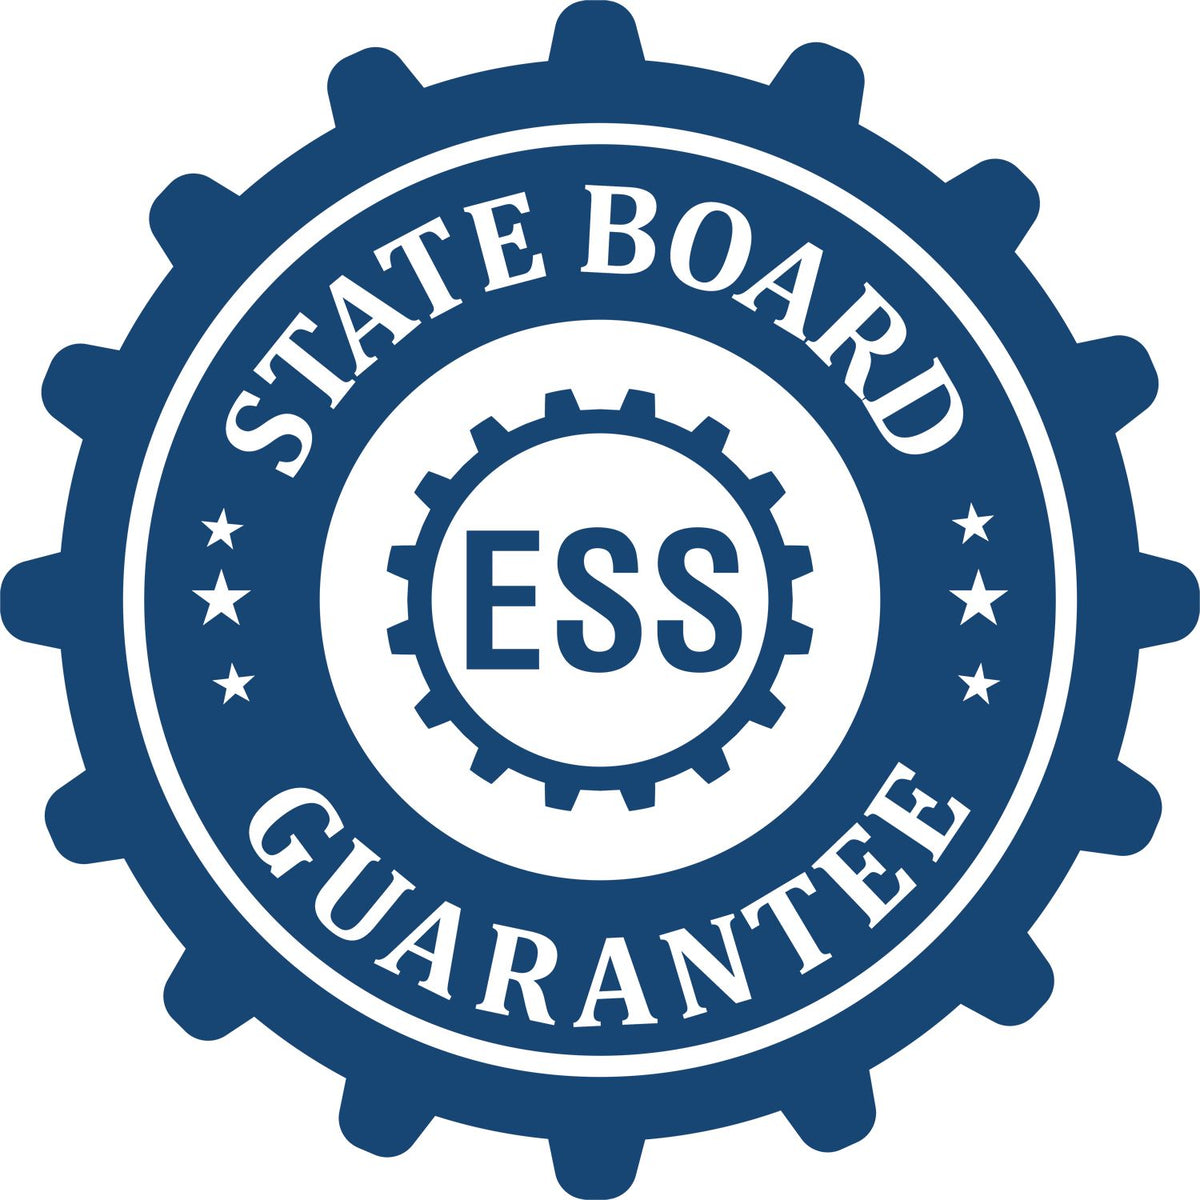 An emblem in a gear shape illustrating a state board guarantee for the State of Colorado Extended Long Reach Geologist Seal